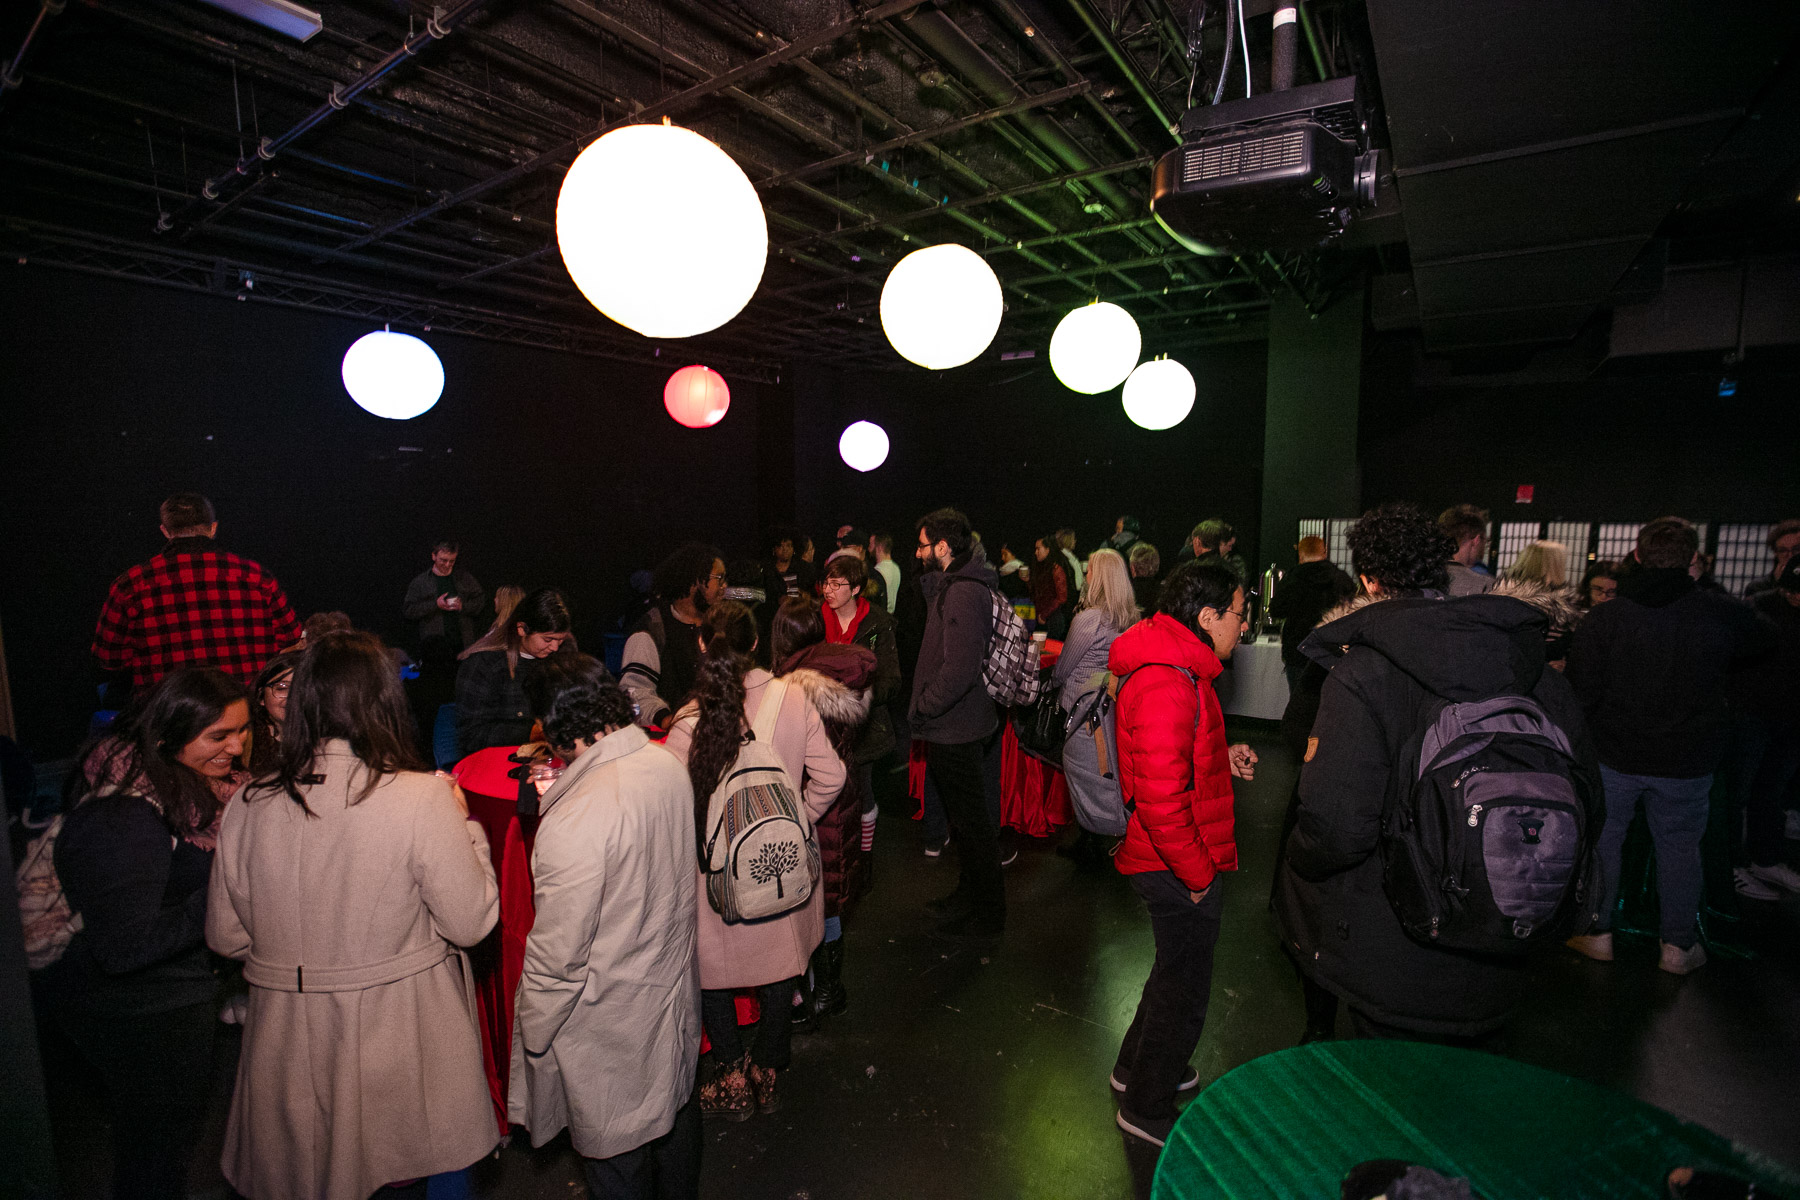 The DePaul community, family and guests were invited for a post-unveiling reception which included hot chocolate and holiday treats on the Digital Cinema Stage. (DePaul University/Randall Spriggs)